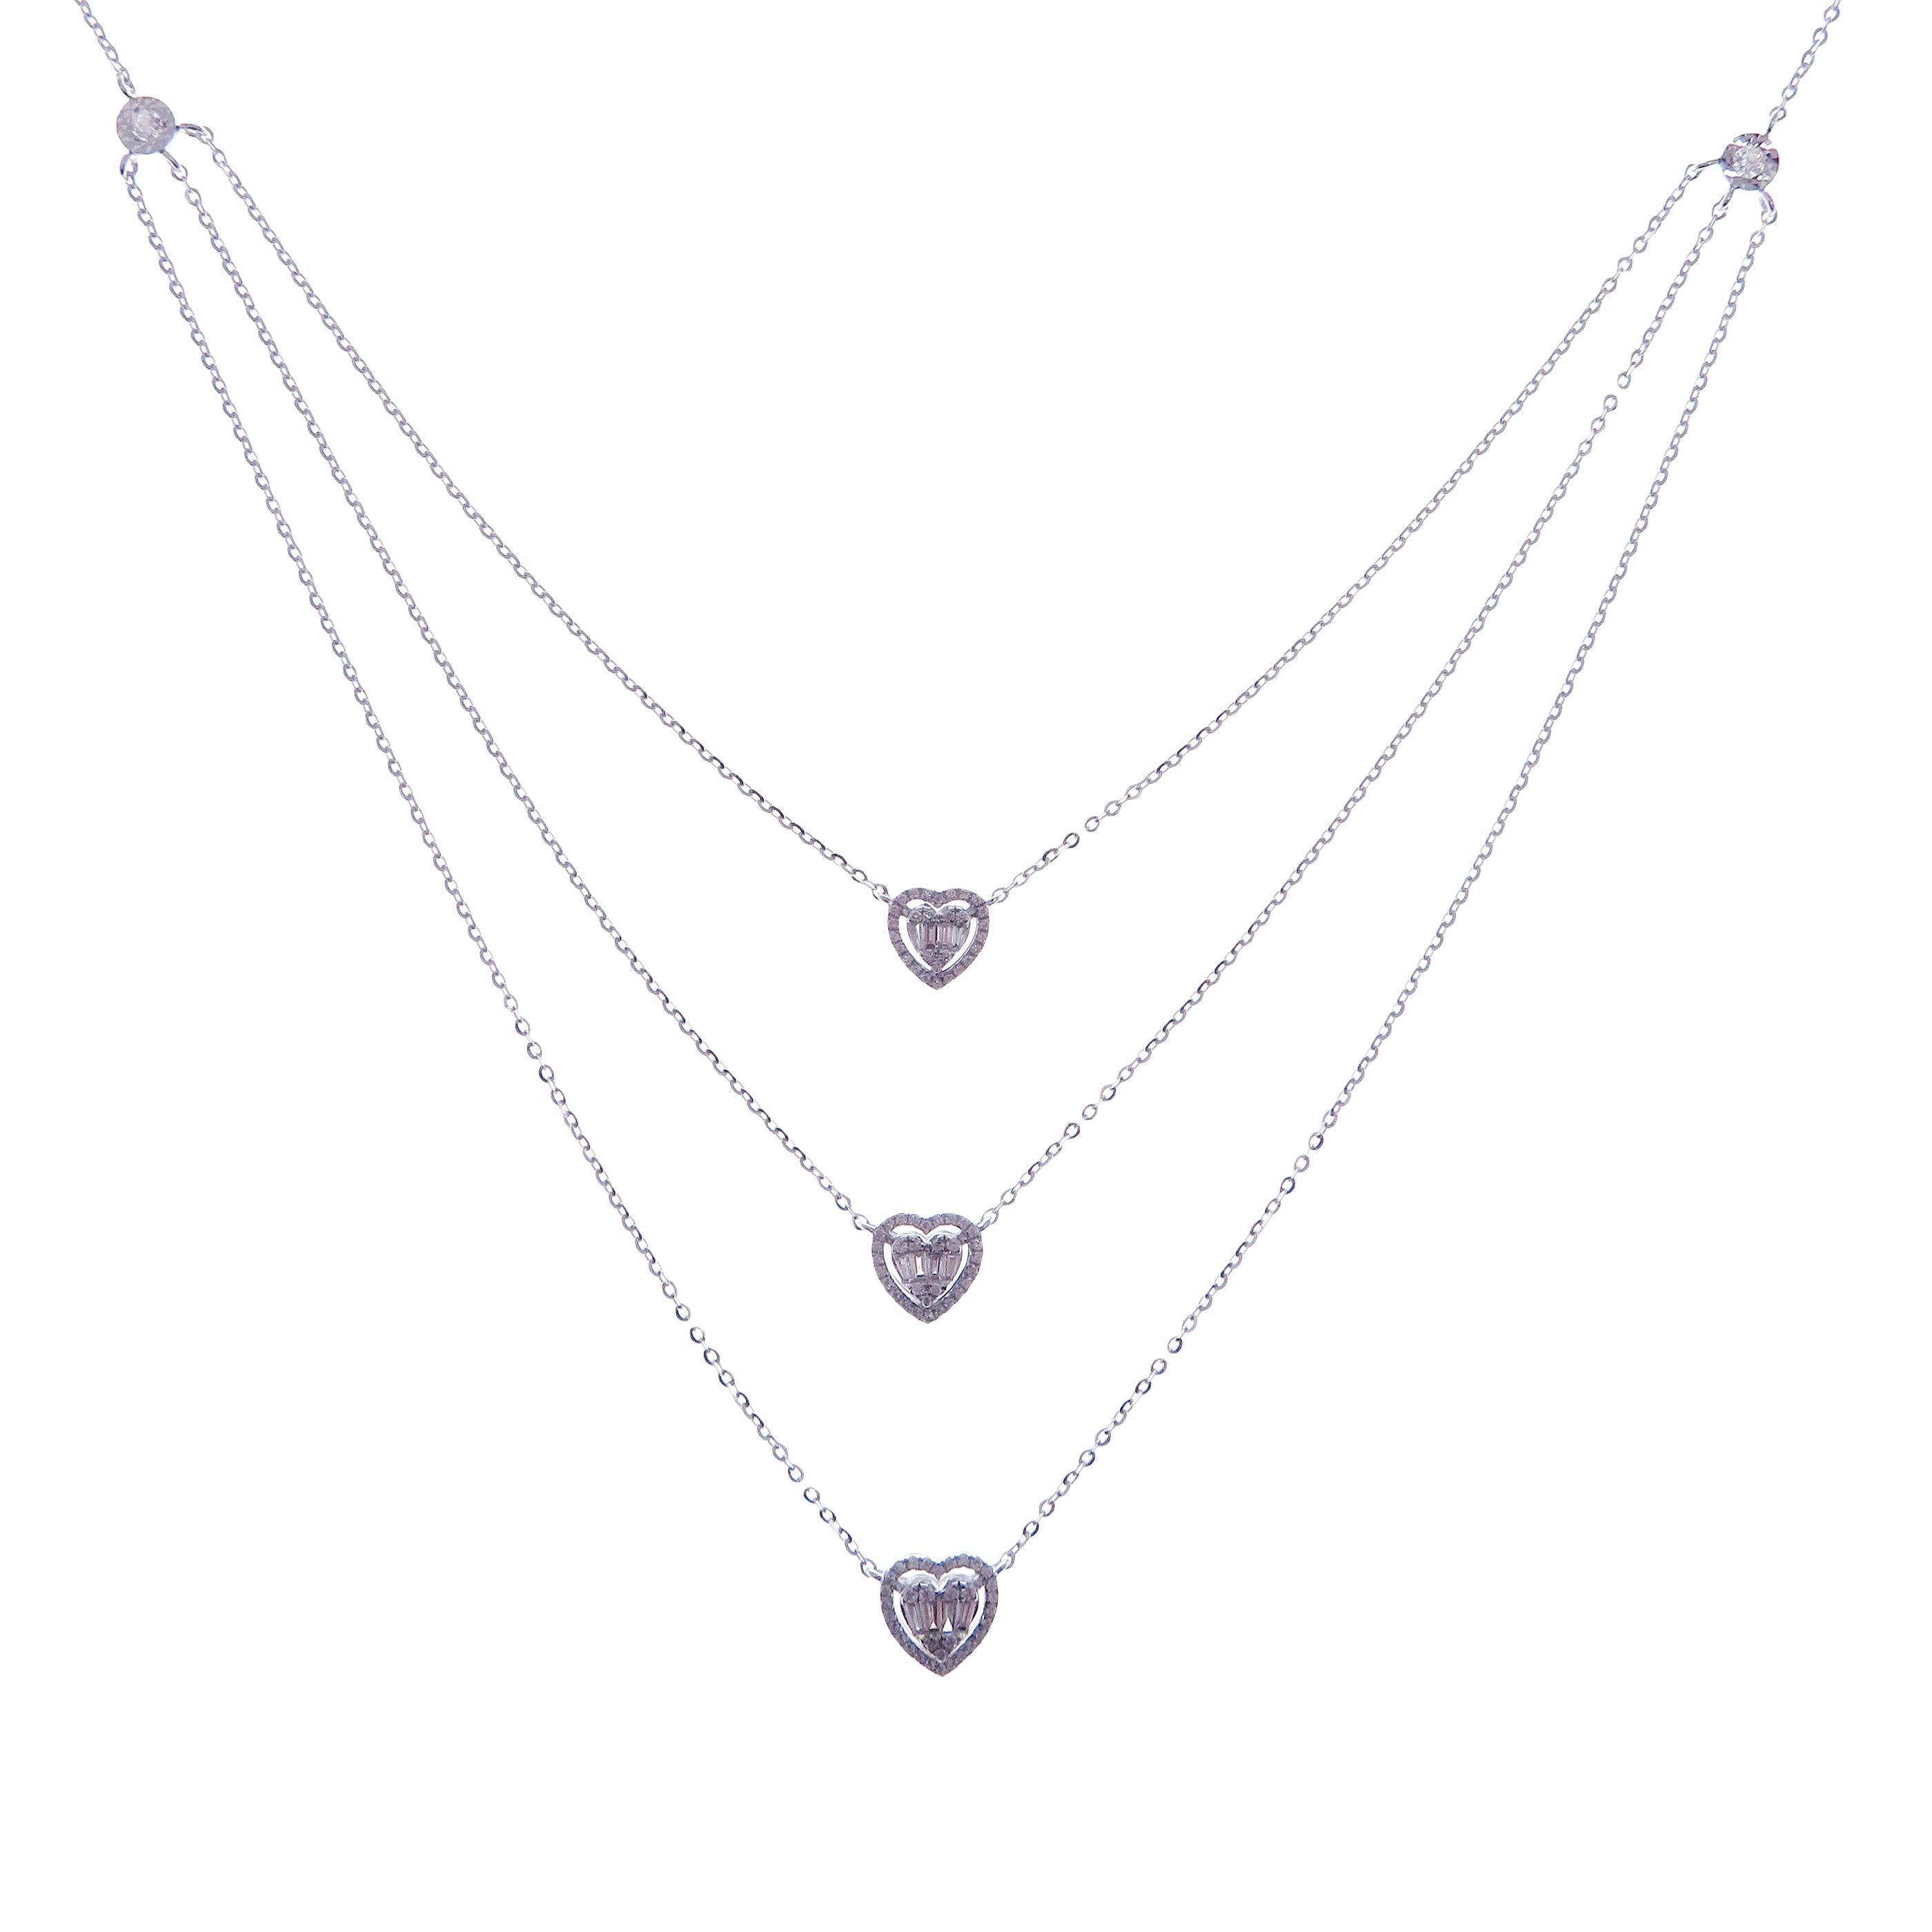 This triple sweet hearts necklace is crafted in 18-karat white gold, weighing approximately 0.61 total carats of SI Quality white diamond. 

Necklace is 16